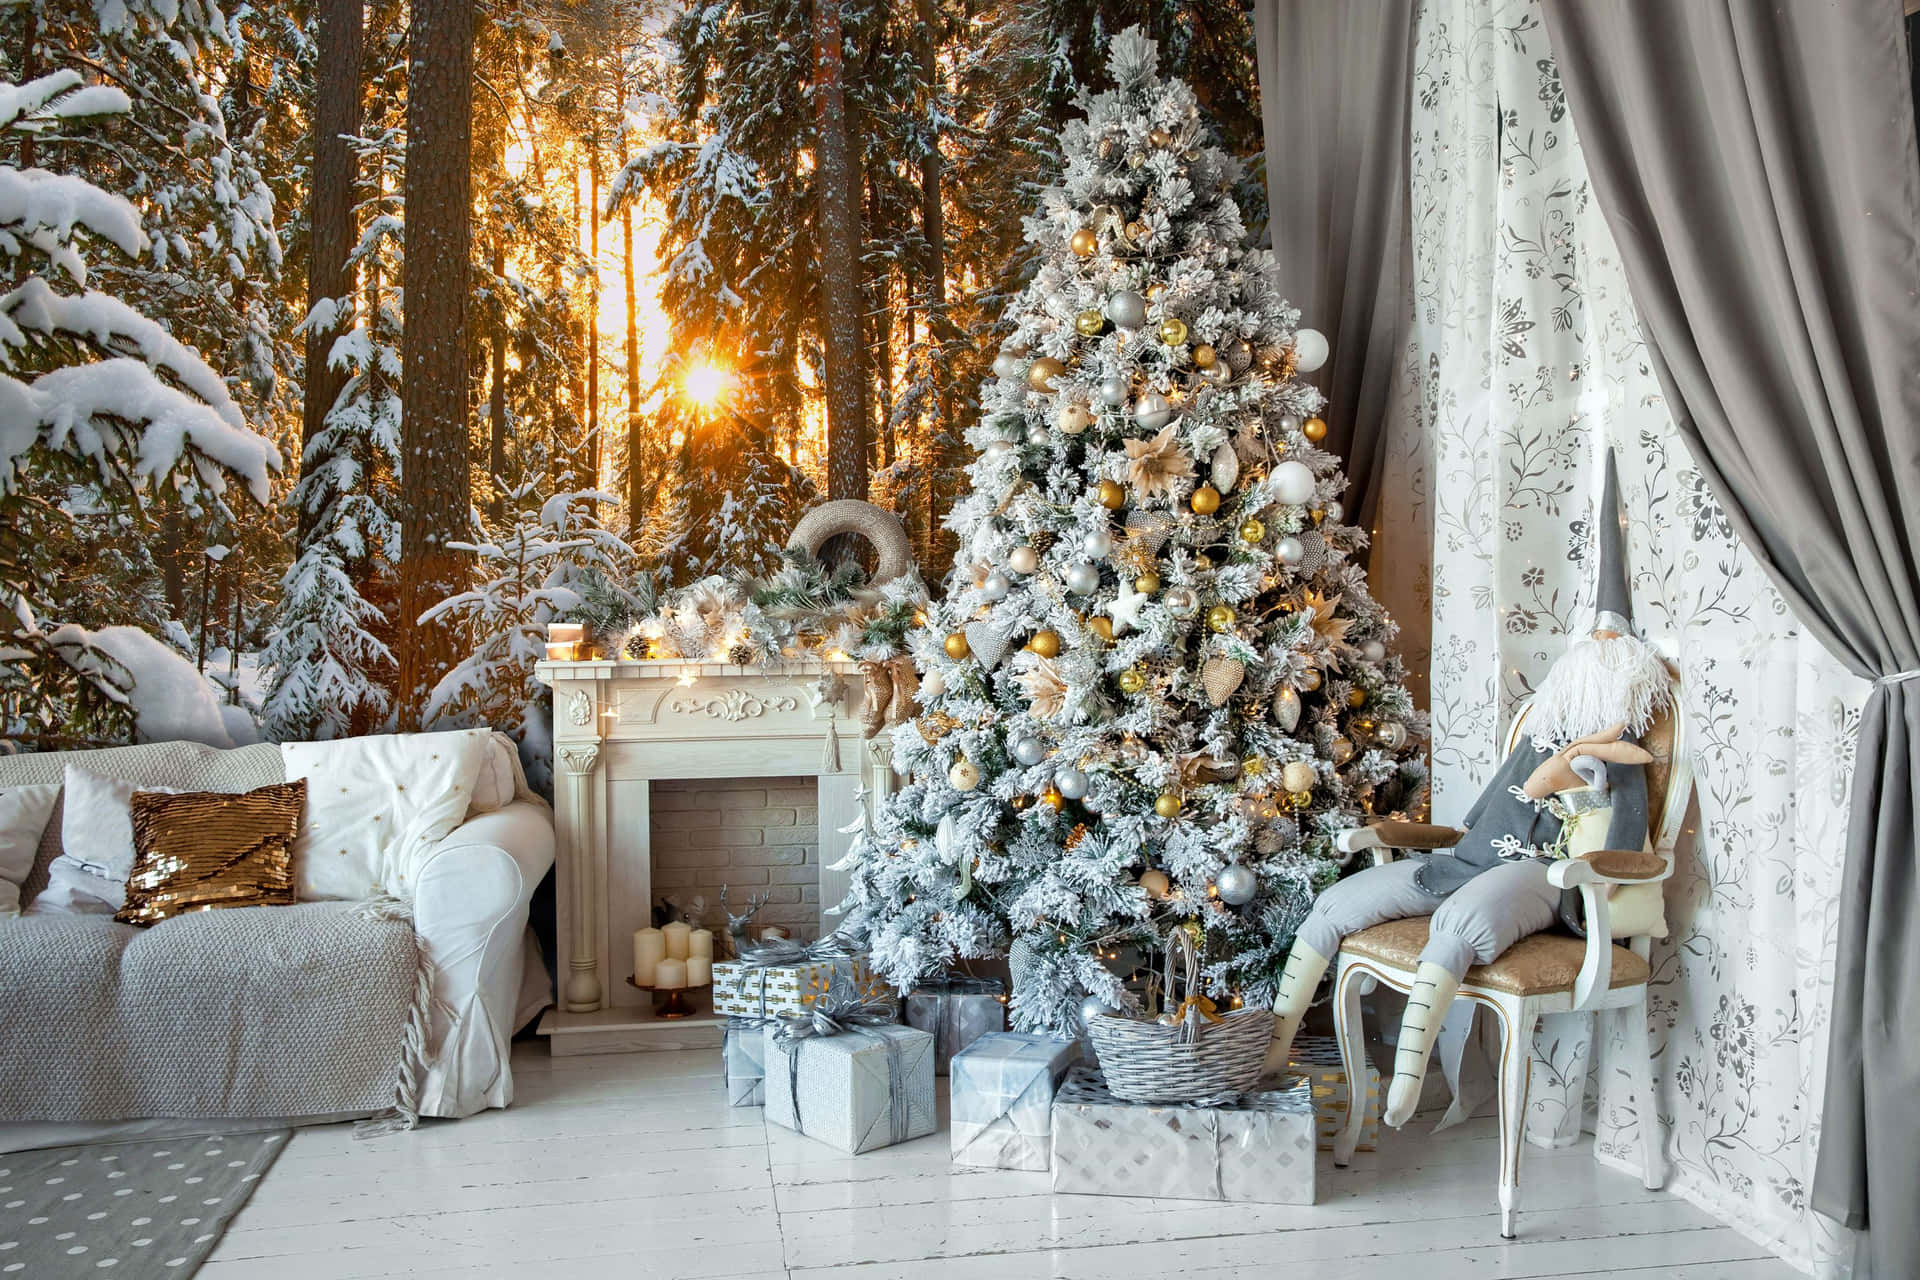 A Living Room With A Christmas Tree And Decorations